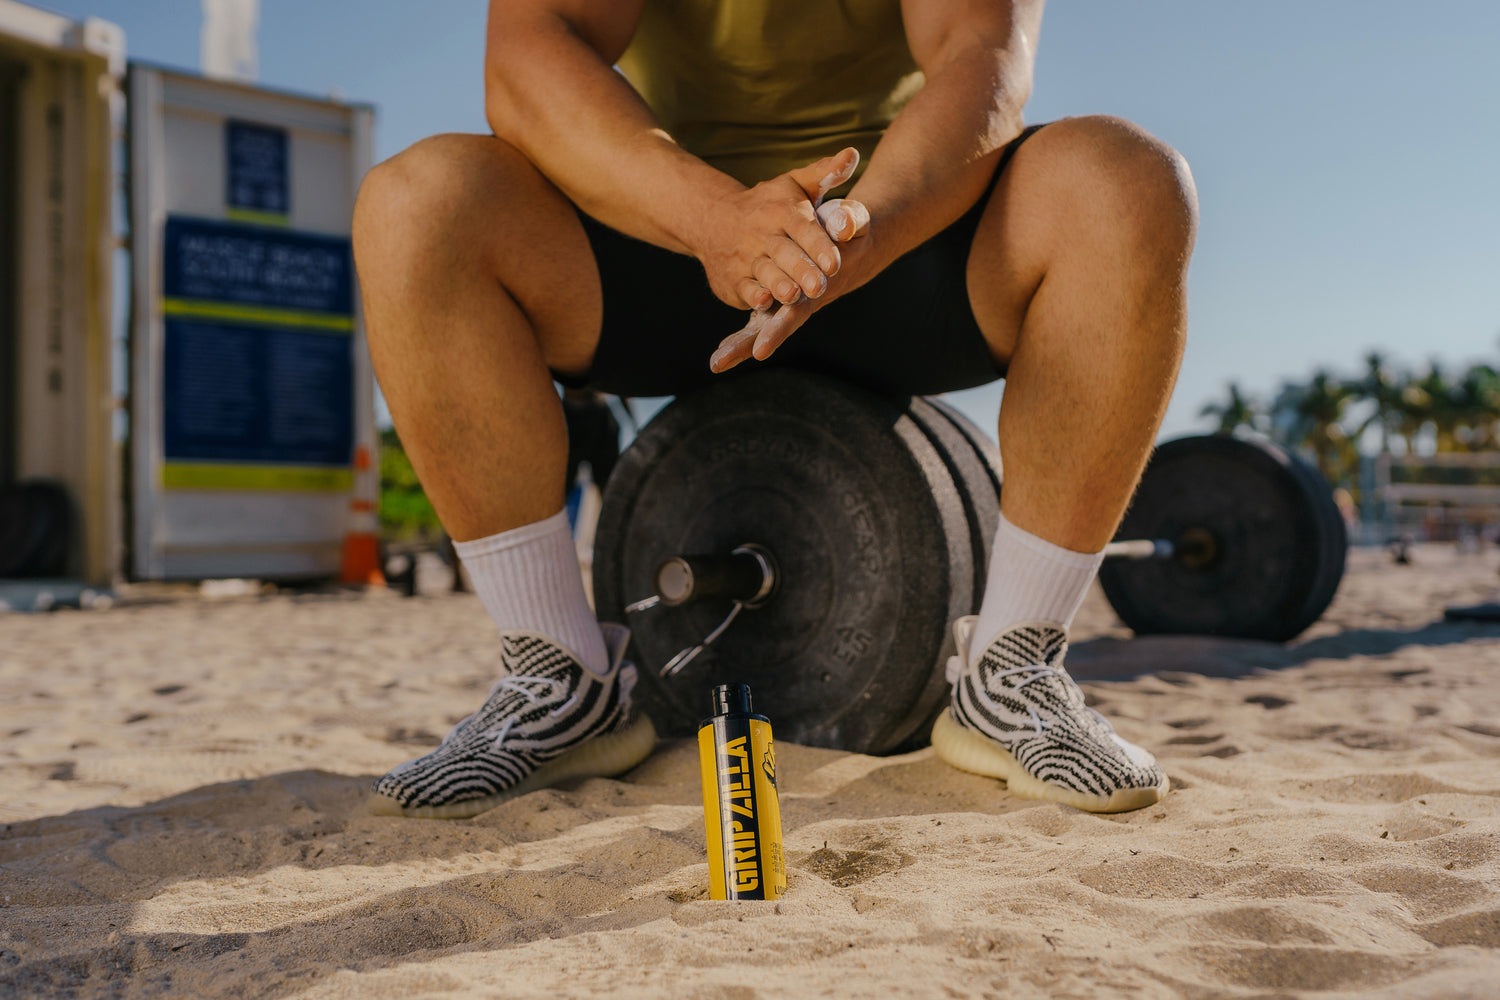 4 Liquid Chalk Benefits That Will Convince Fitness Professionals To Chalk It Up - Gripzilla - The Best Grip and Forearm Strength Exercises, Arm Wrestling Tools, Hand Grippers to Improve Grip Strength